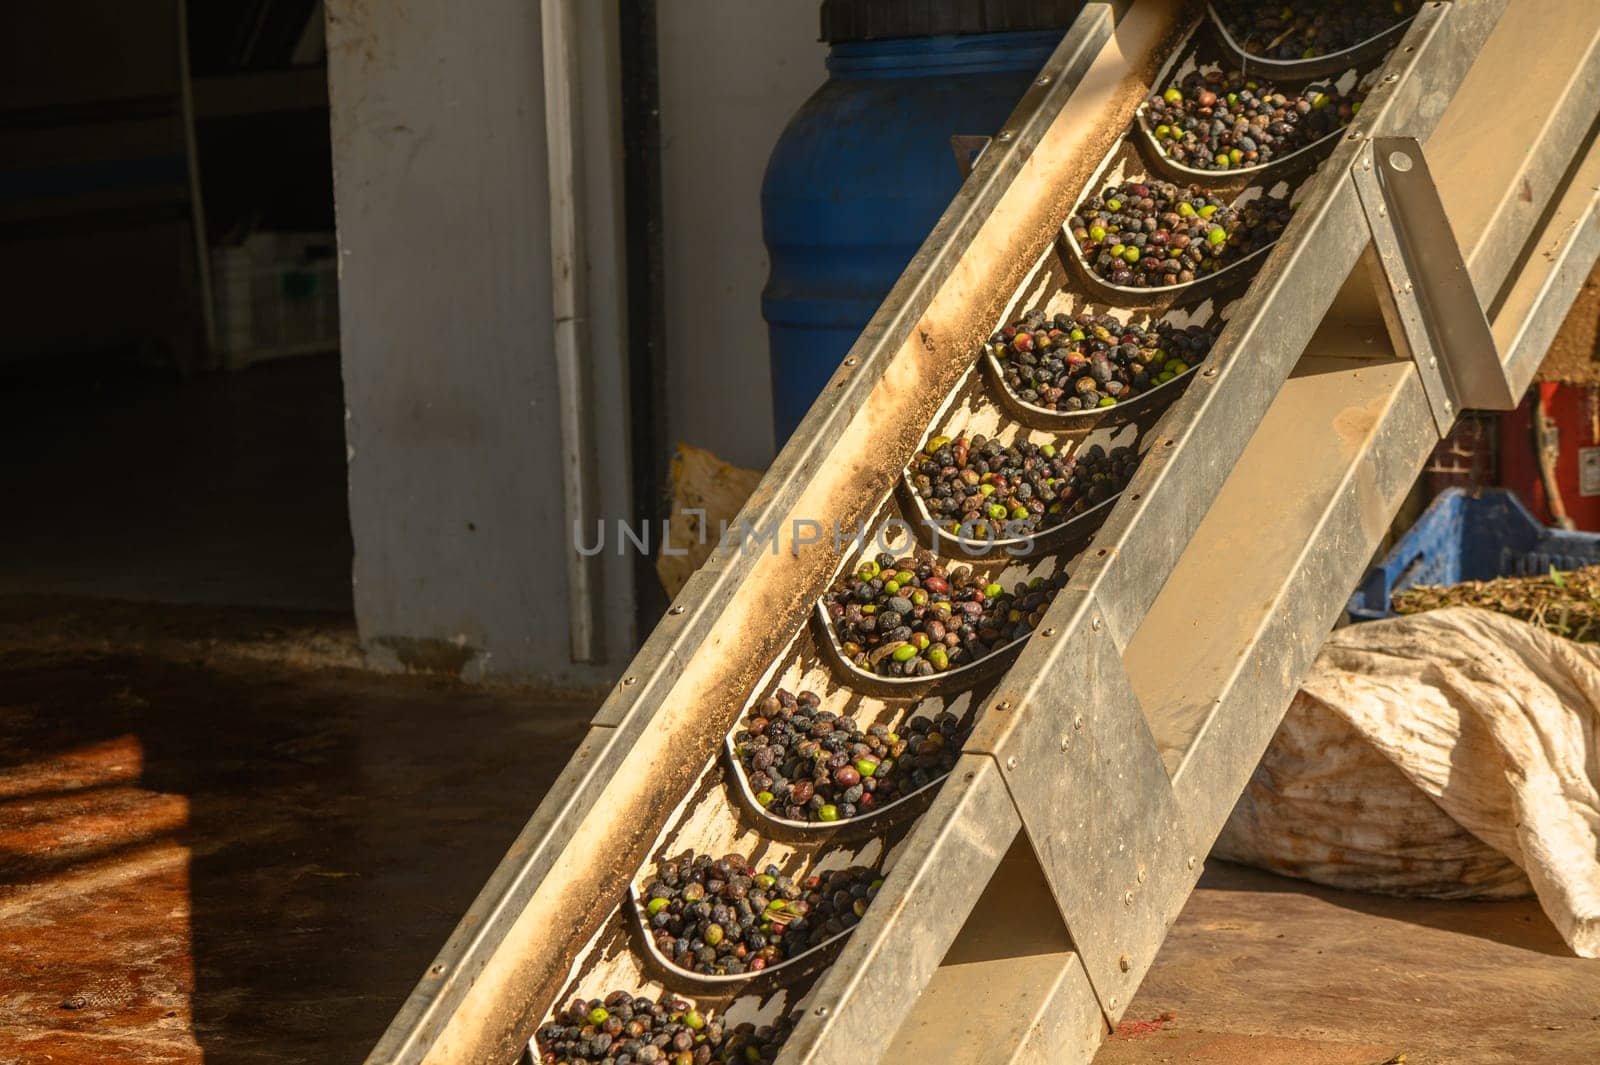 olives are transported from a bunker to an olive oil pressing plant 1